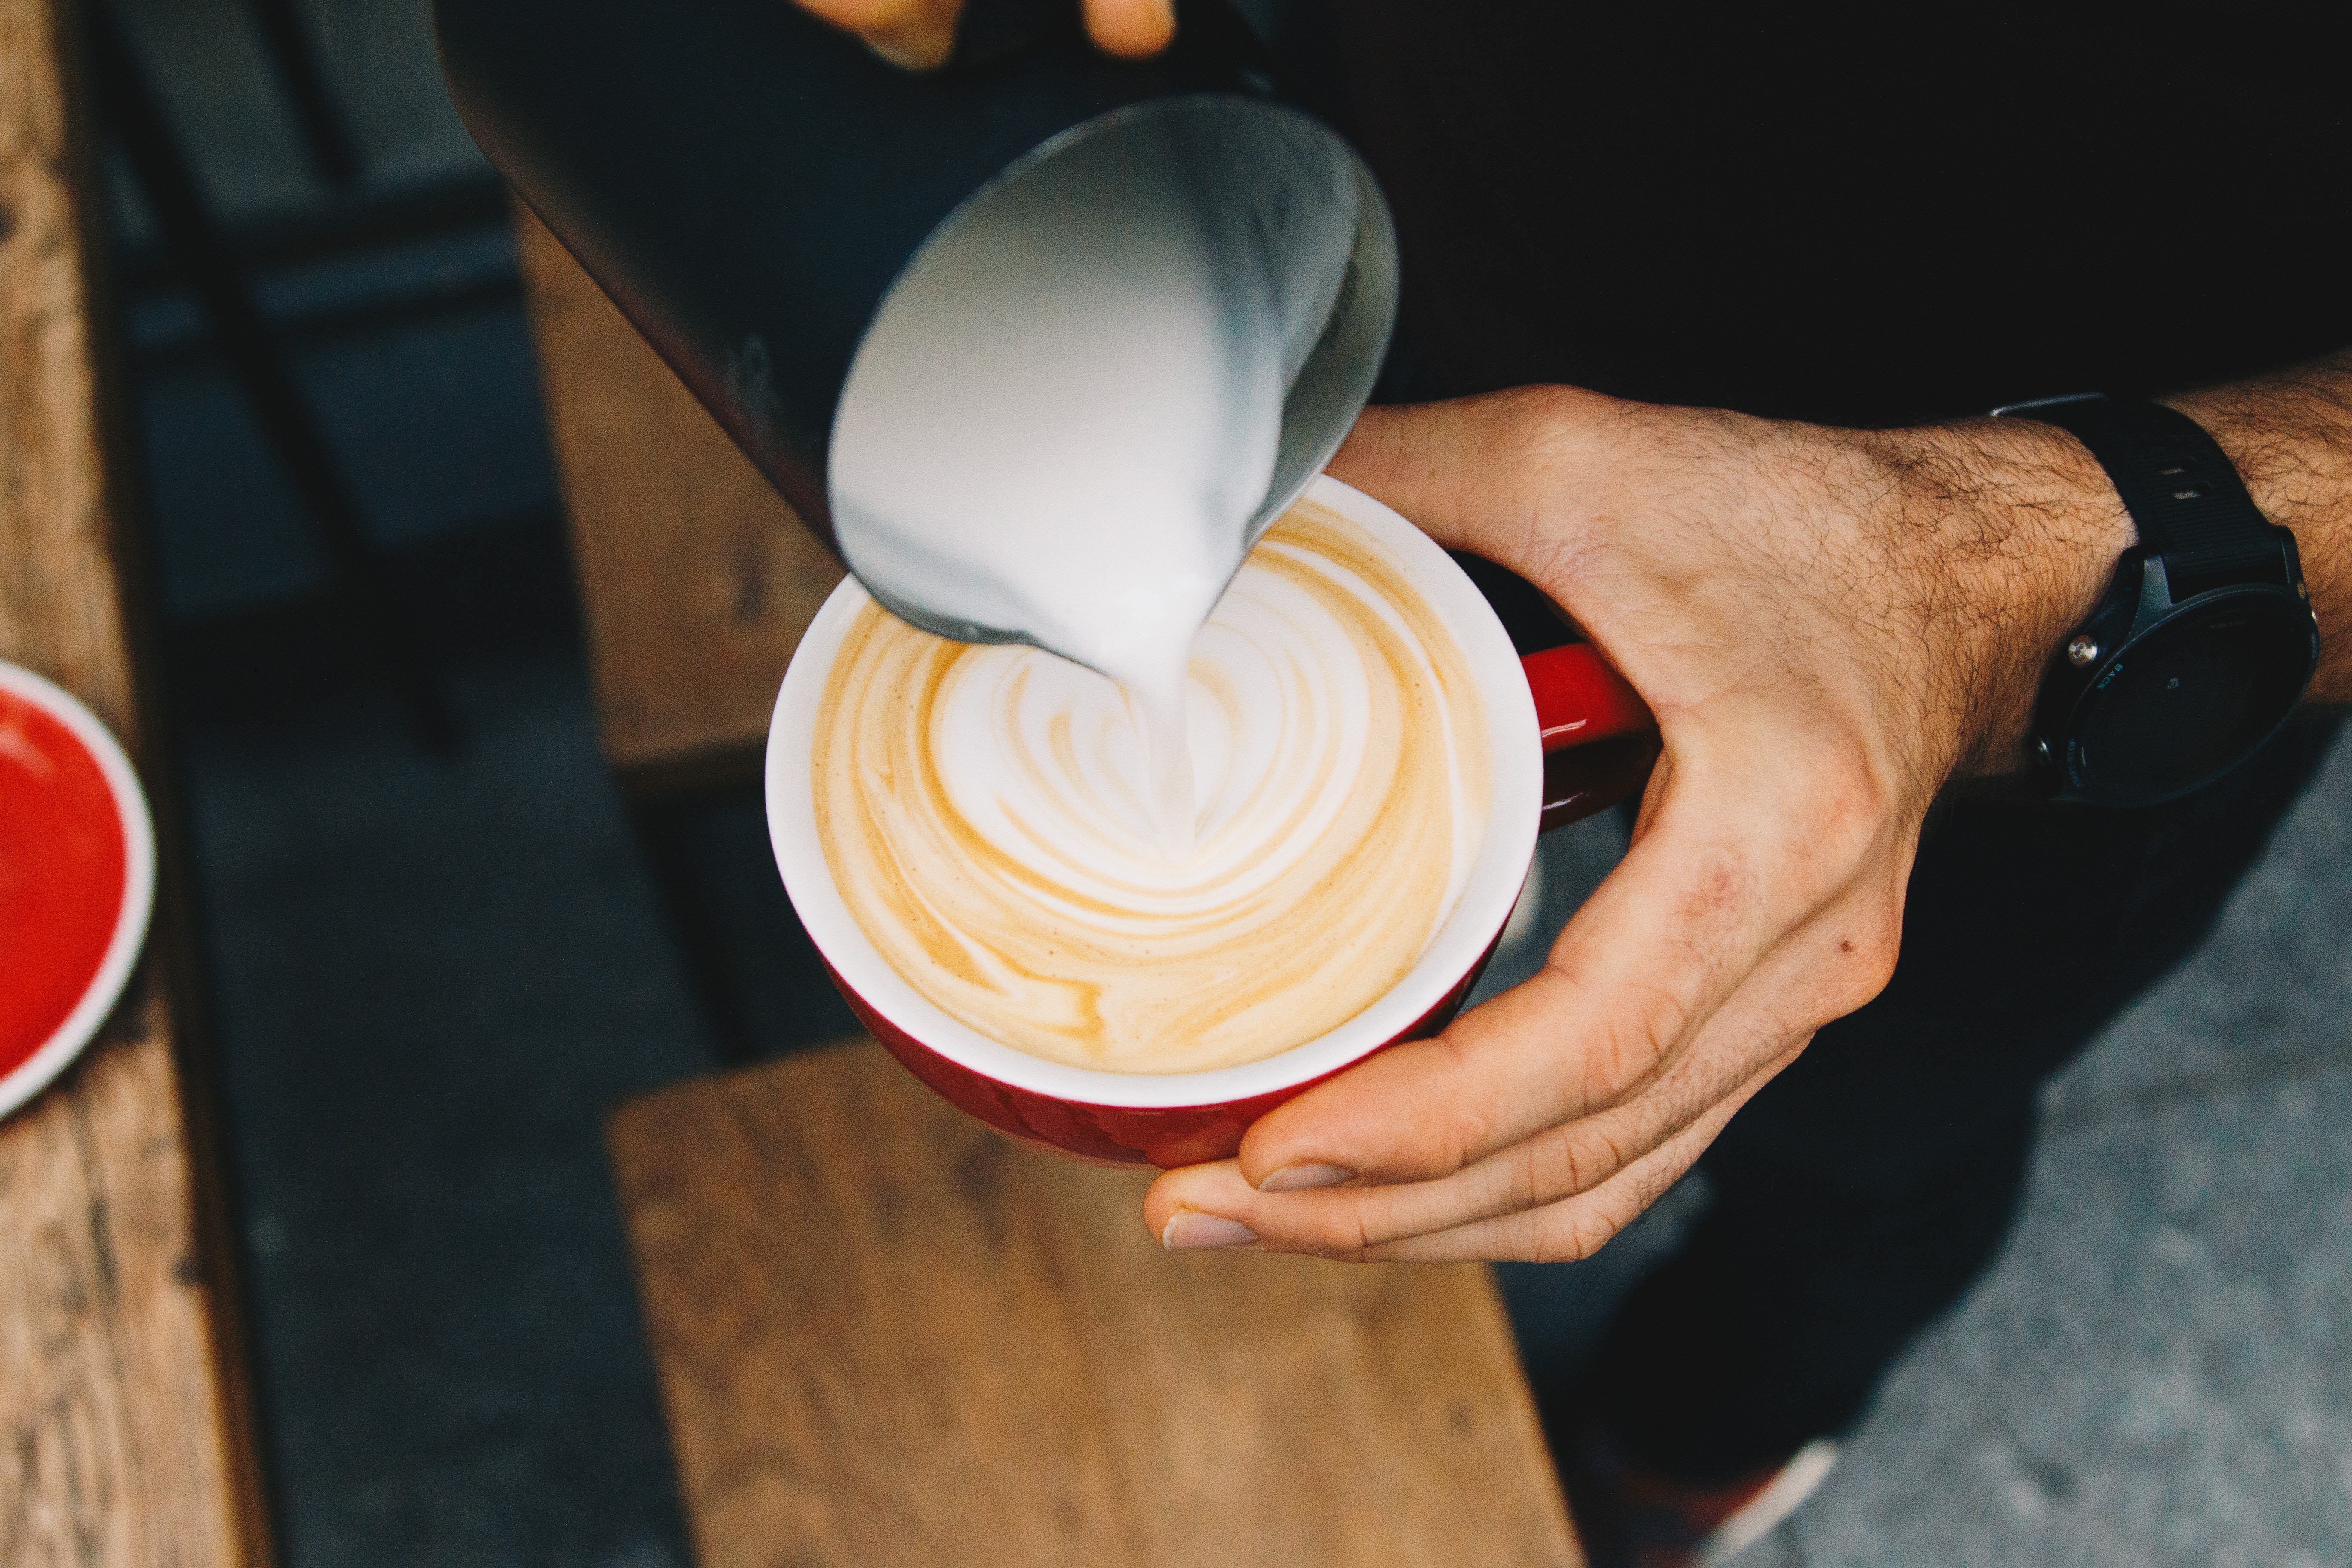 Milk pouring into a cup of coffee with man hands holding it.